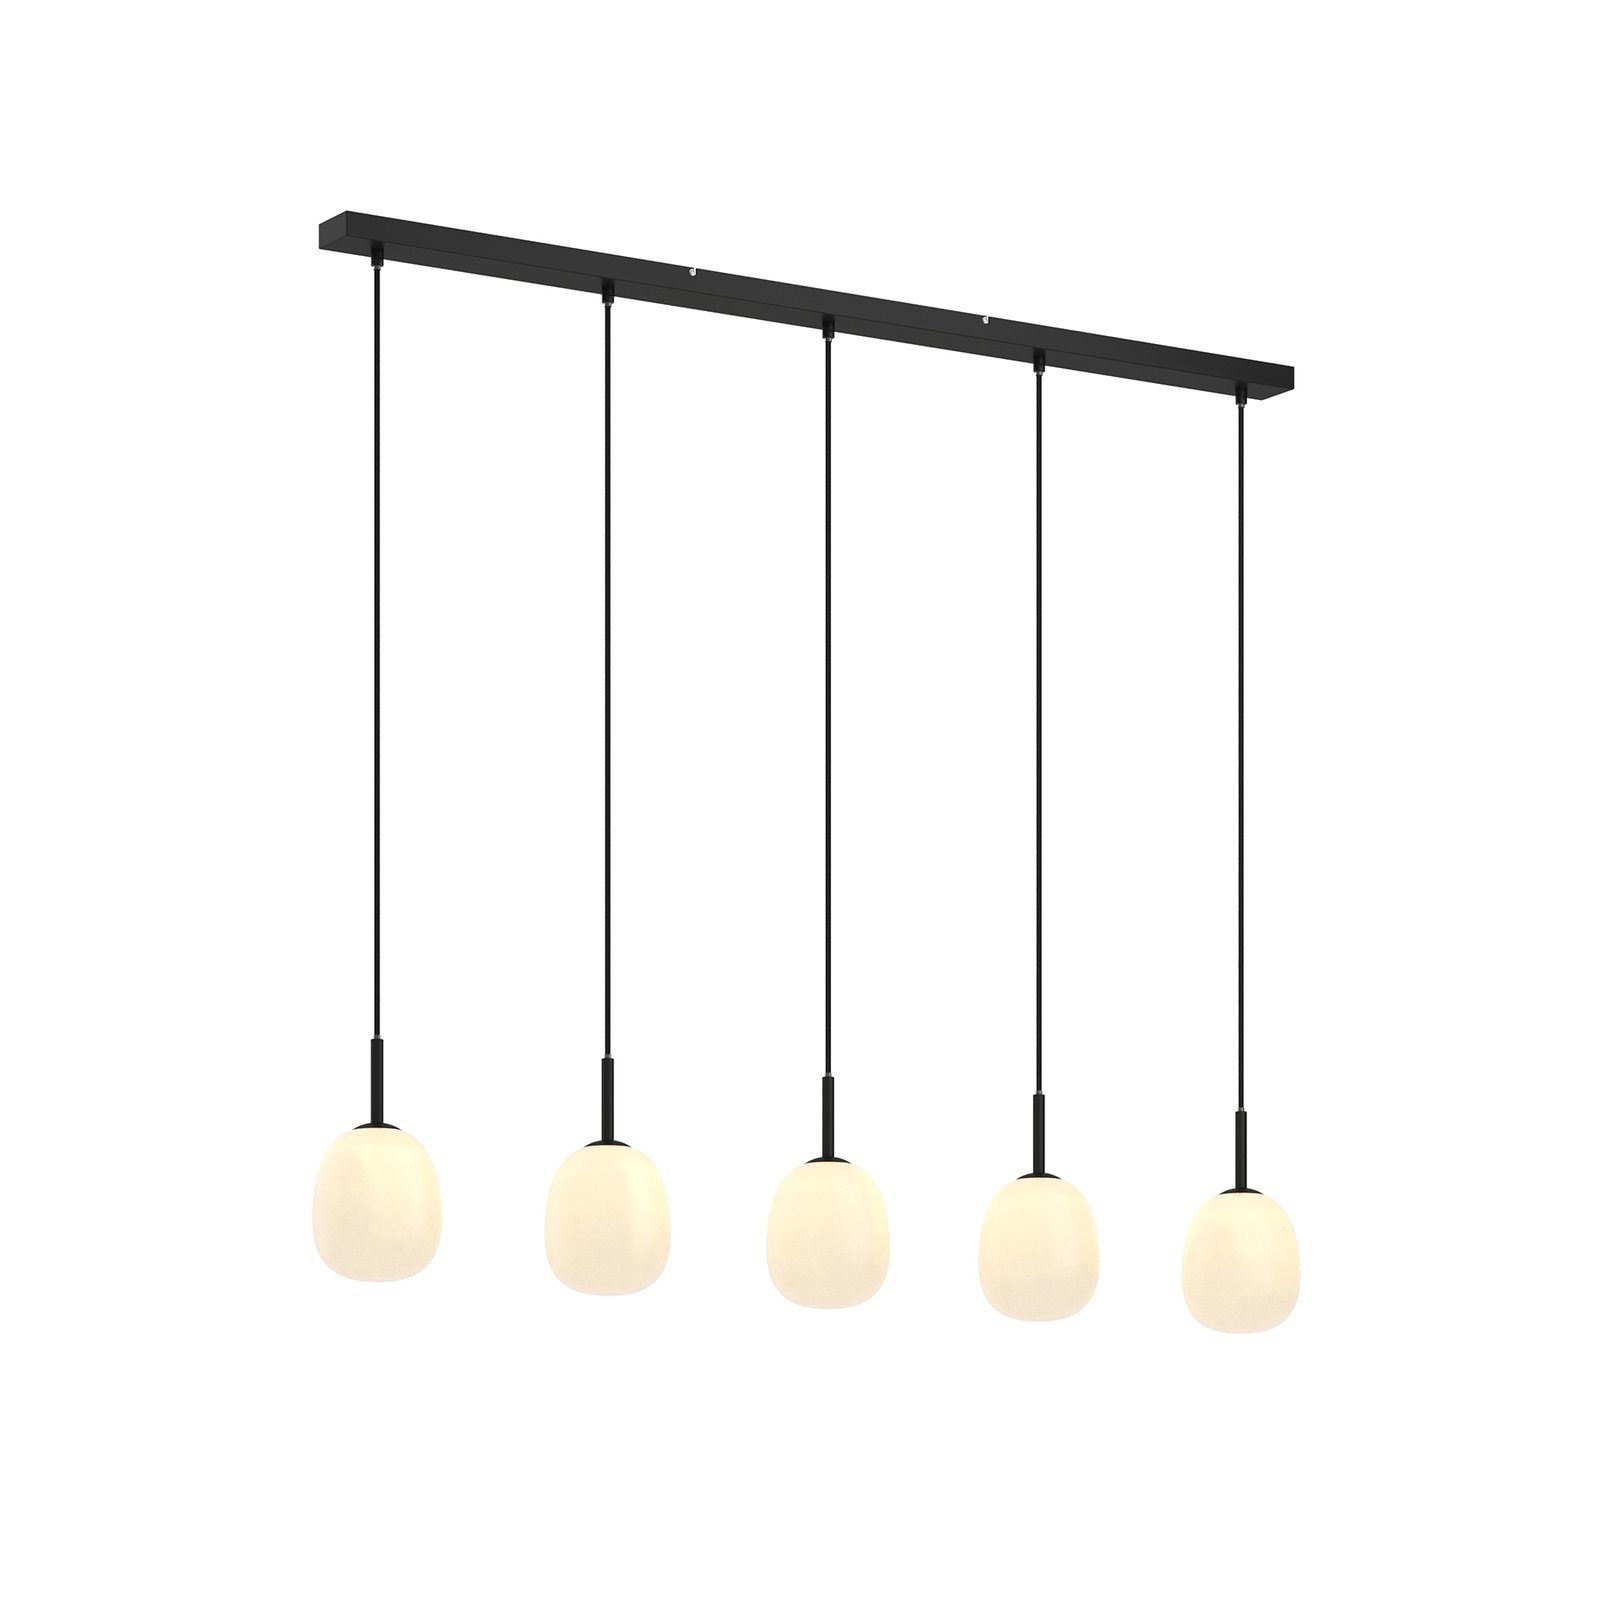 Lindby Etiena hanglamp, 5-lamps, glas opaal